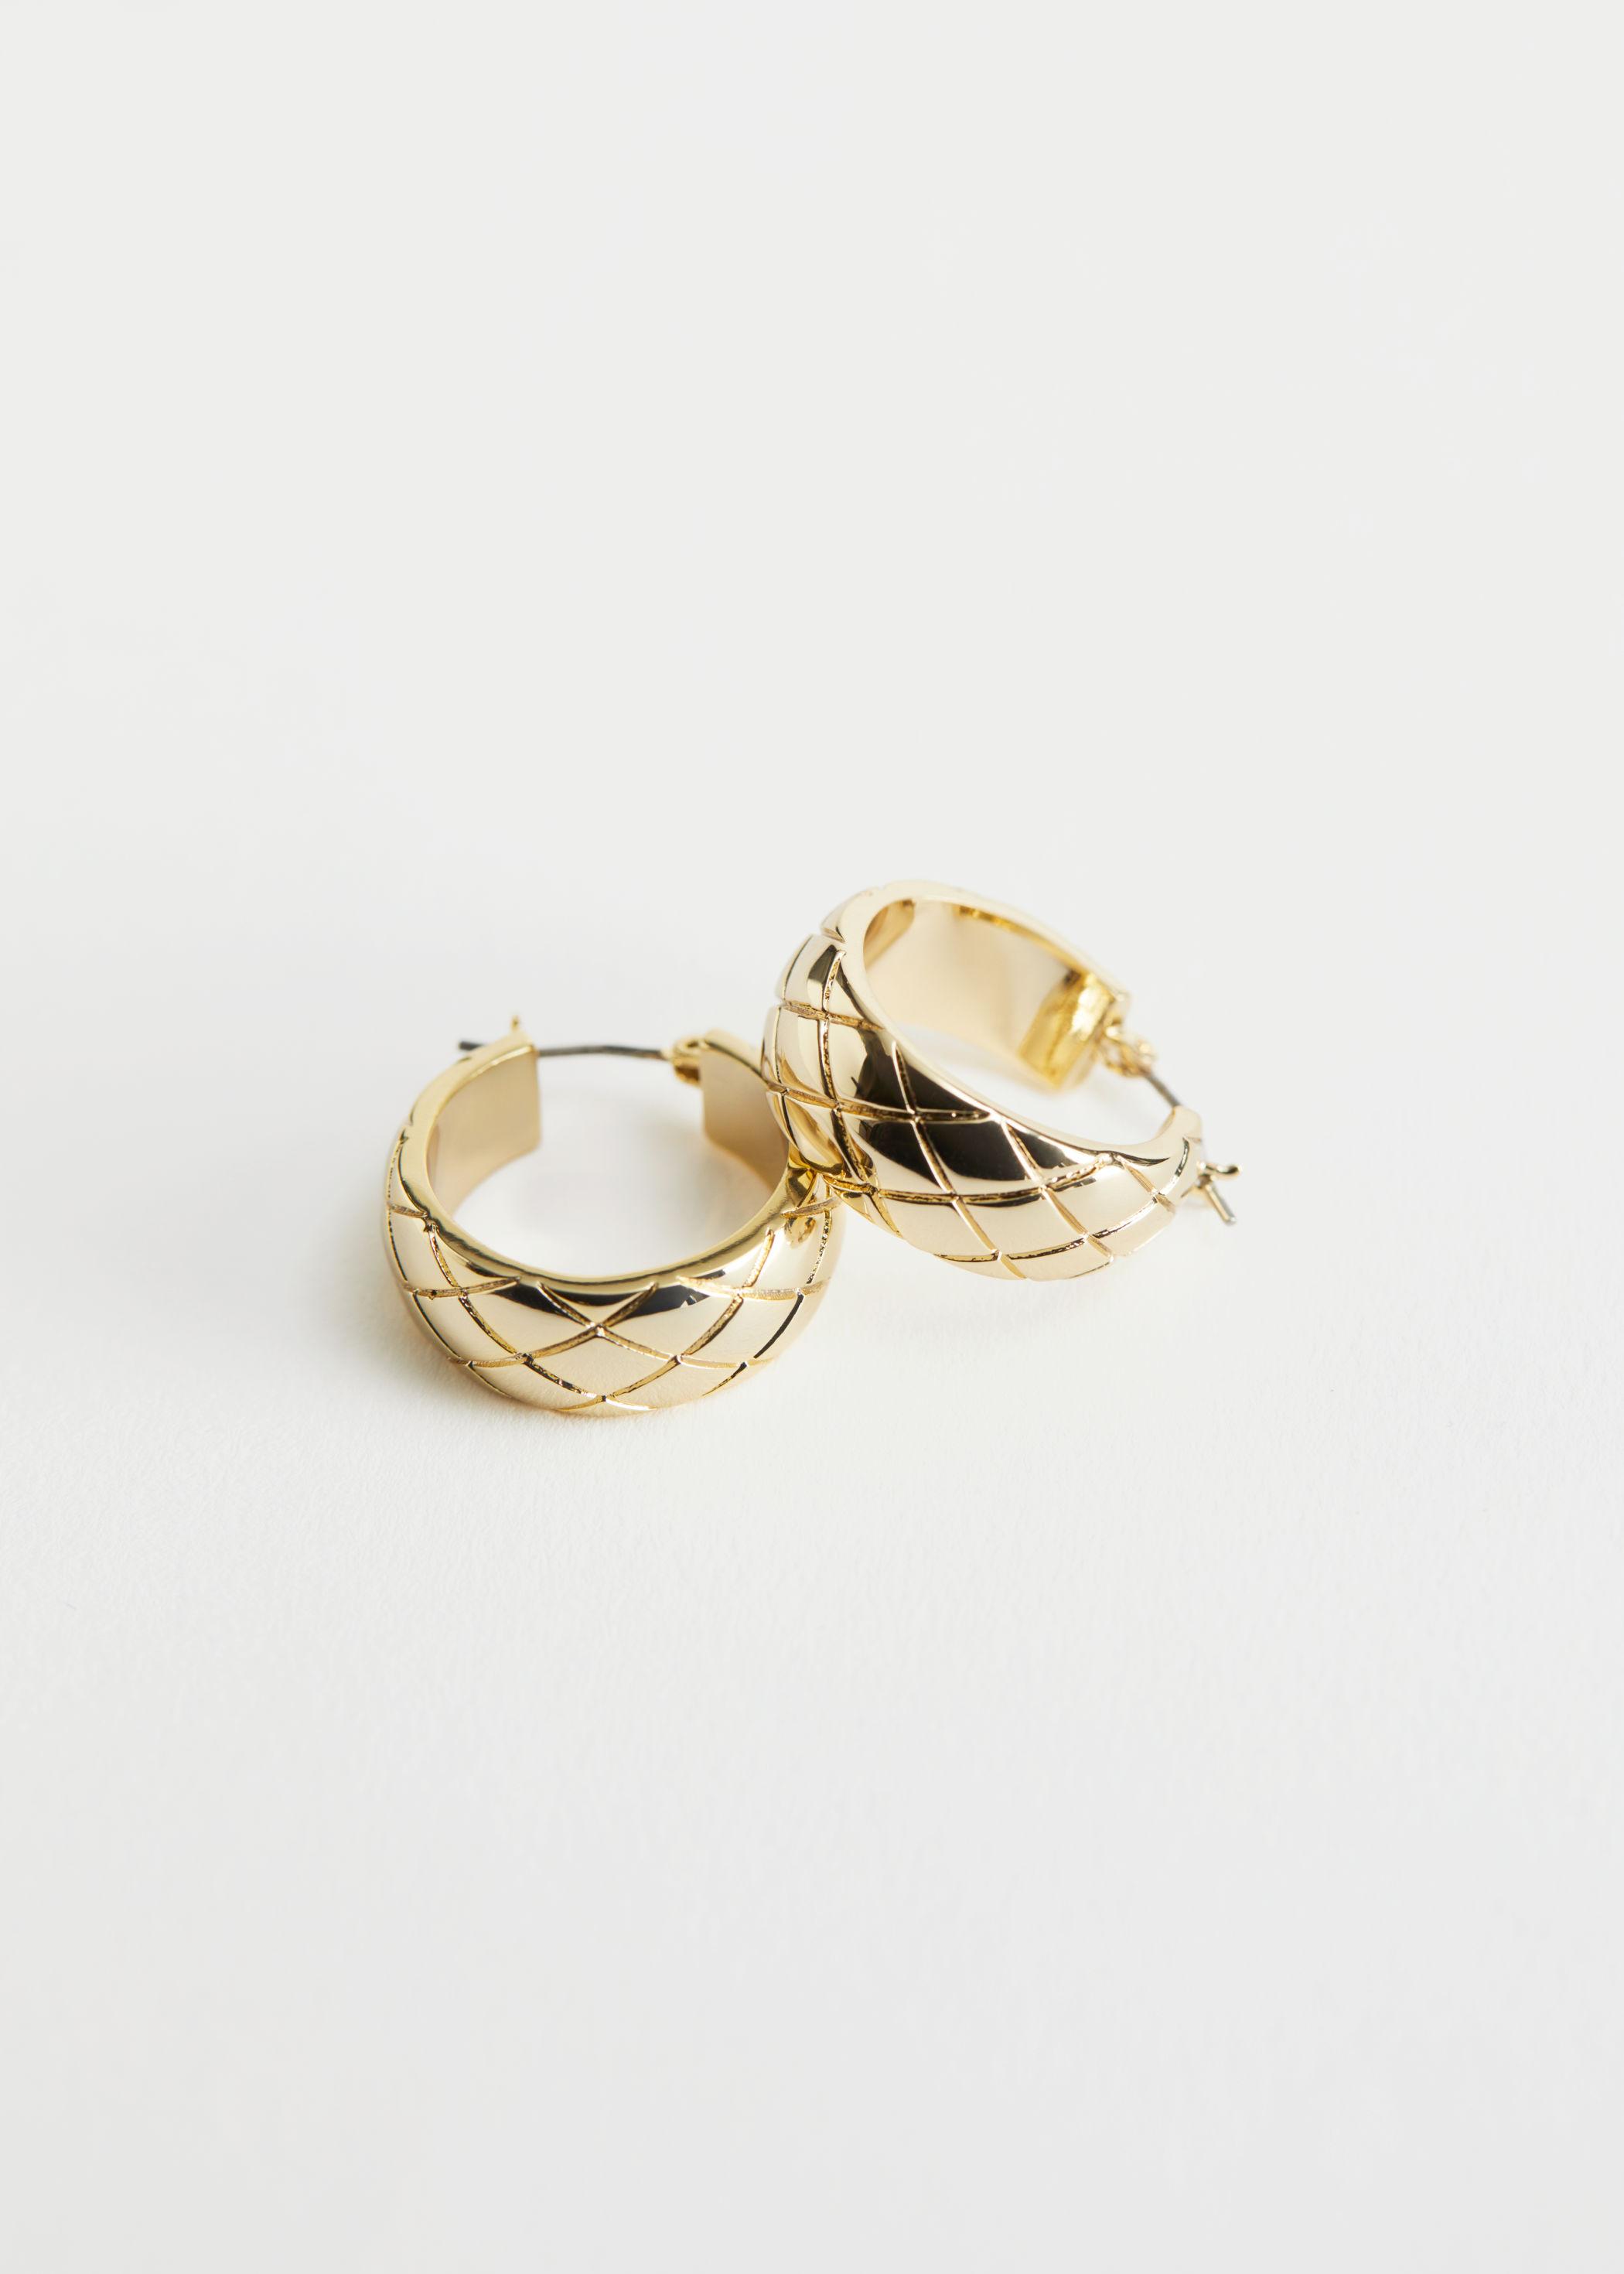 & Other Stories Quilt Embossed Chunky Hoop Earrings in Gold (Metallic ...